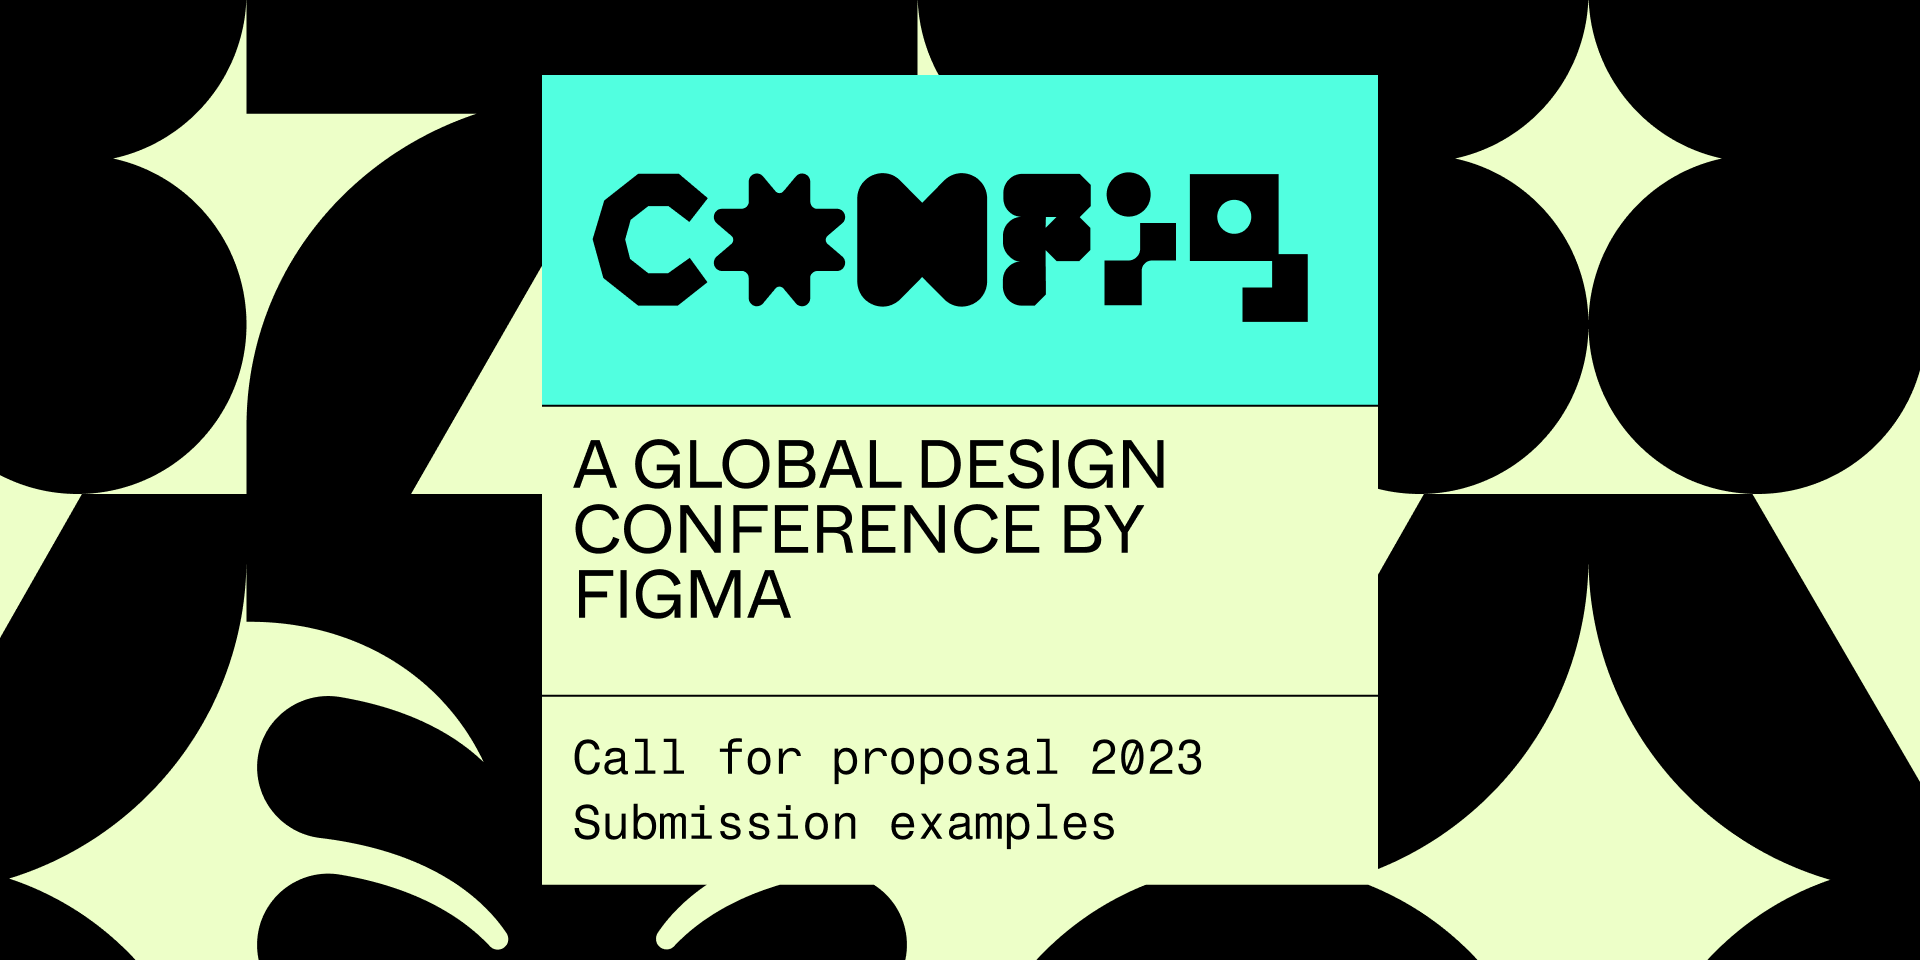 Figma's Config 2023 Conference to Be Held on June 21-22